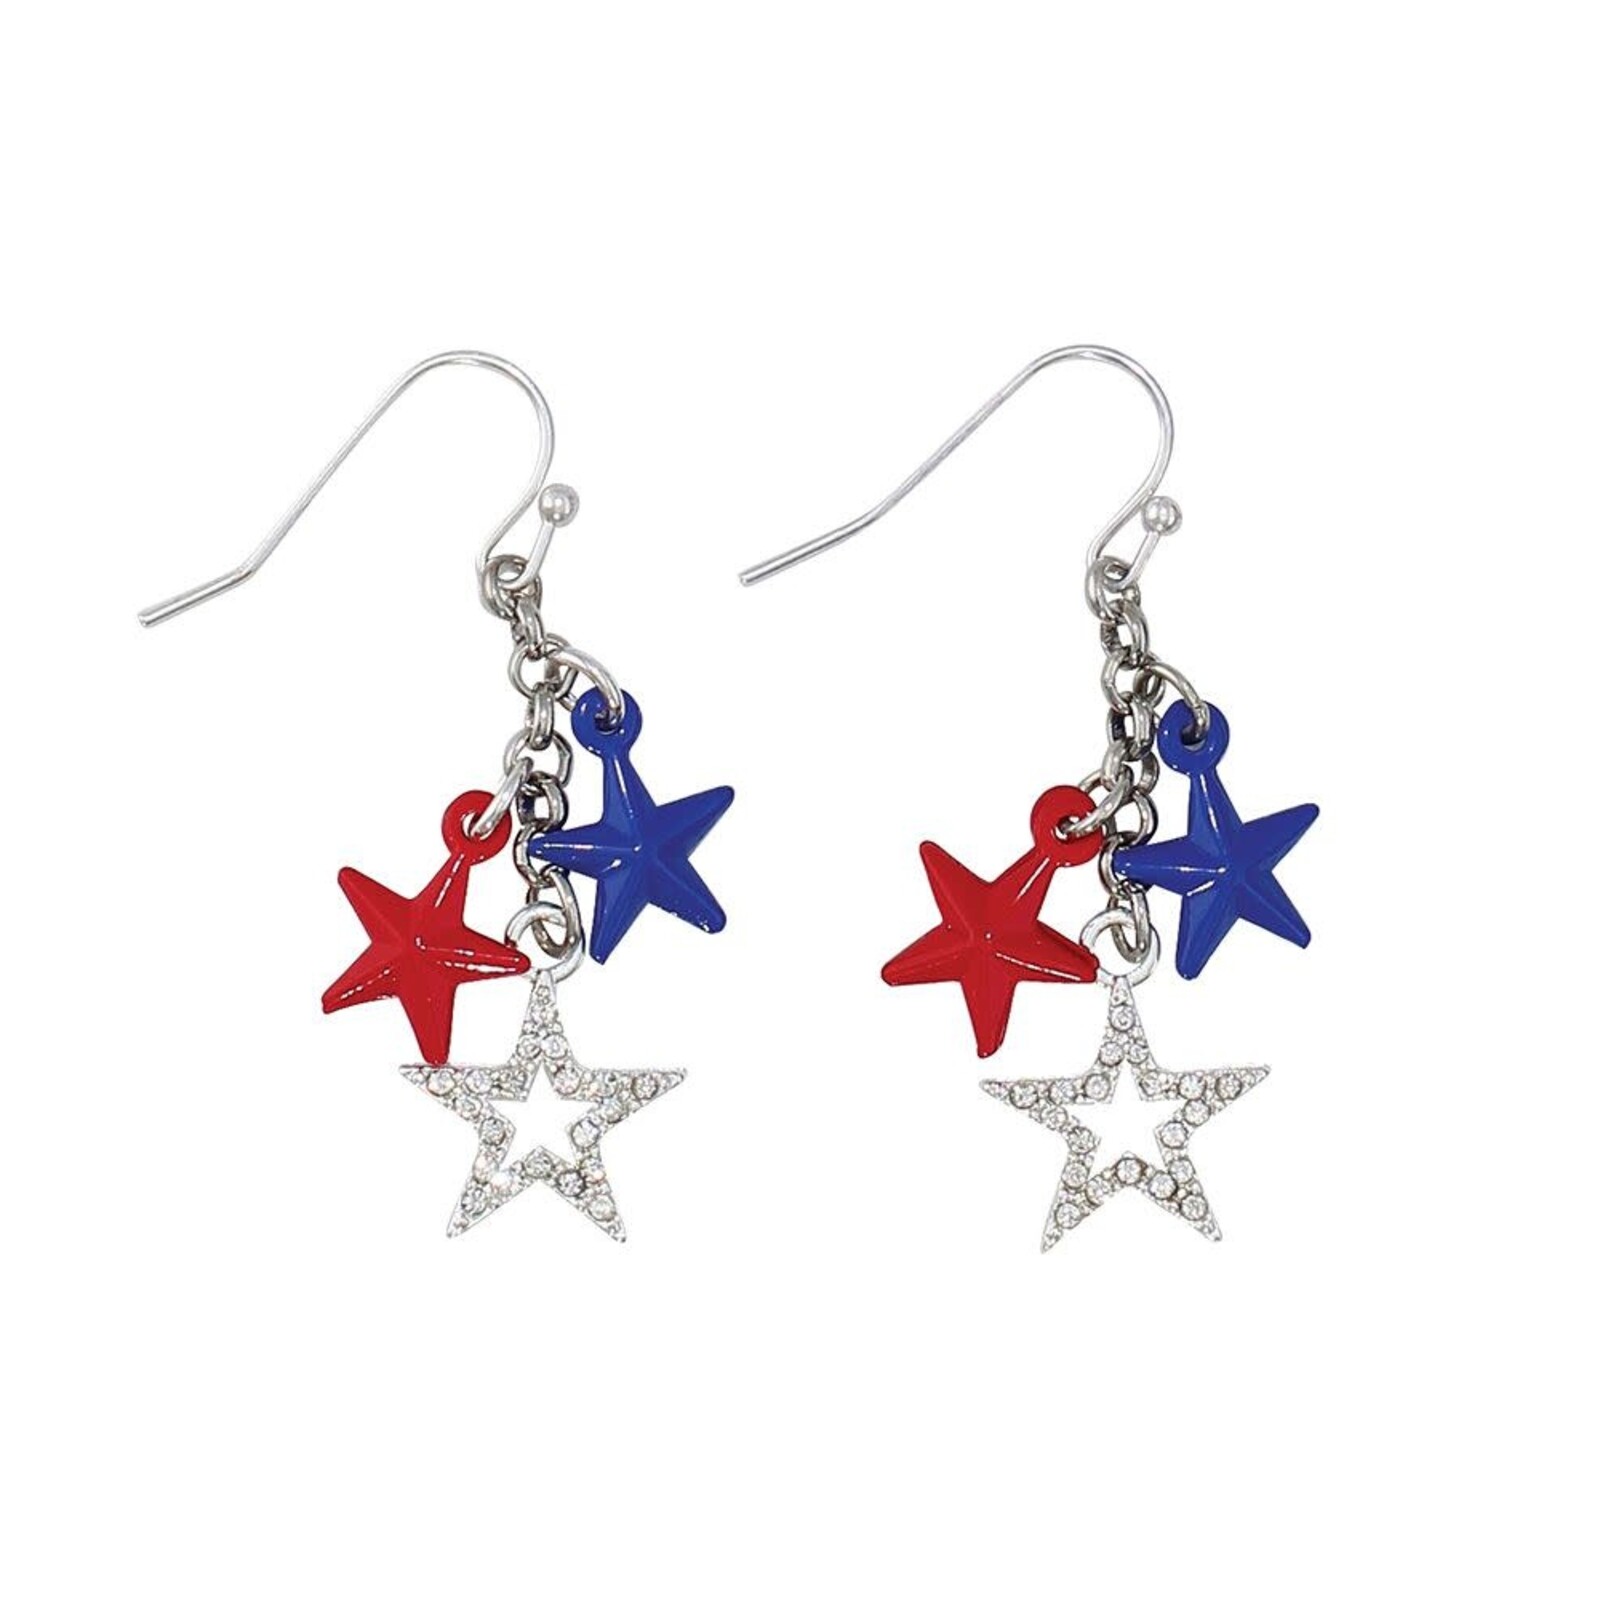 Periwinkle by Barlow Earrings-Stars Cluster with Crystals  8108758 loading=